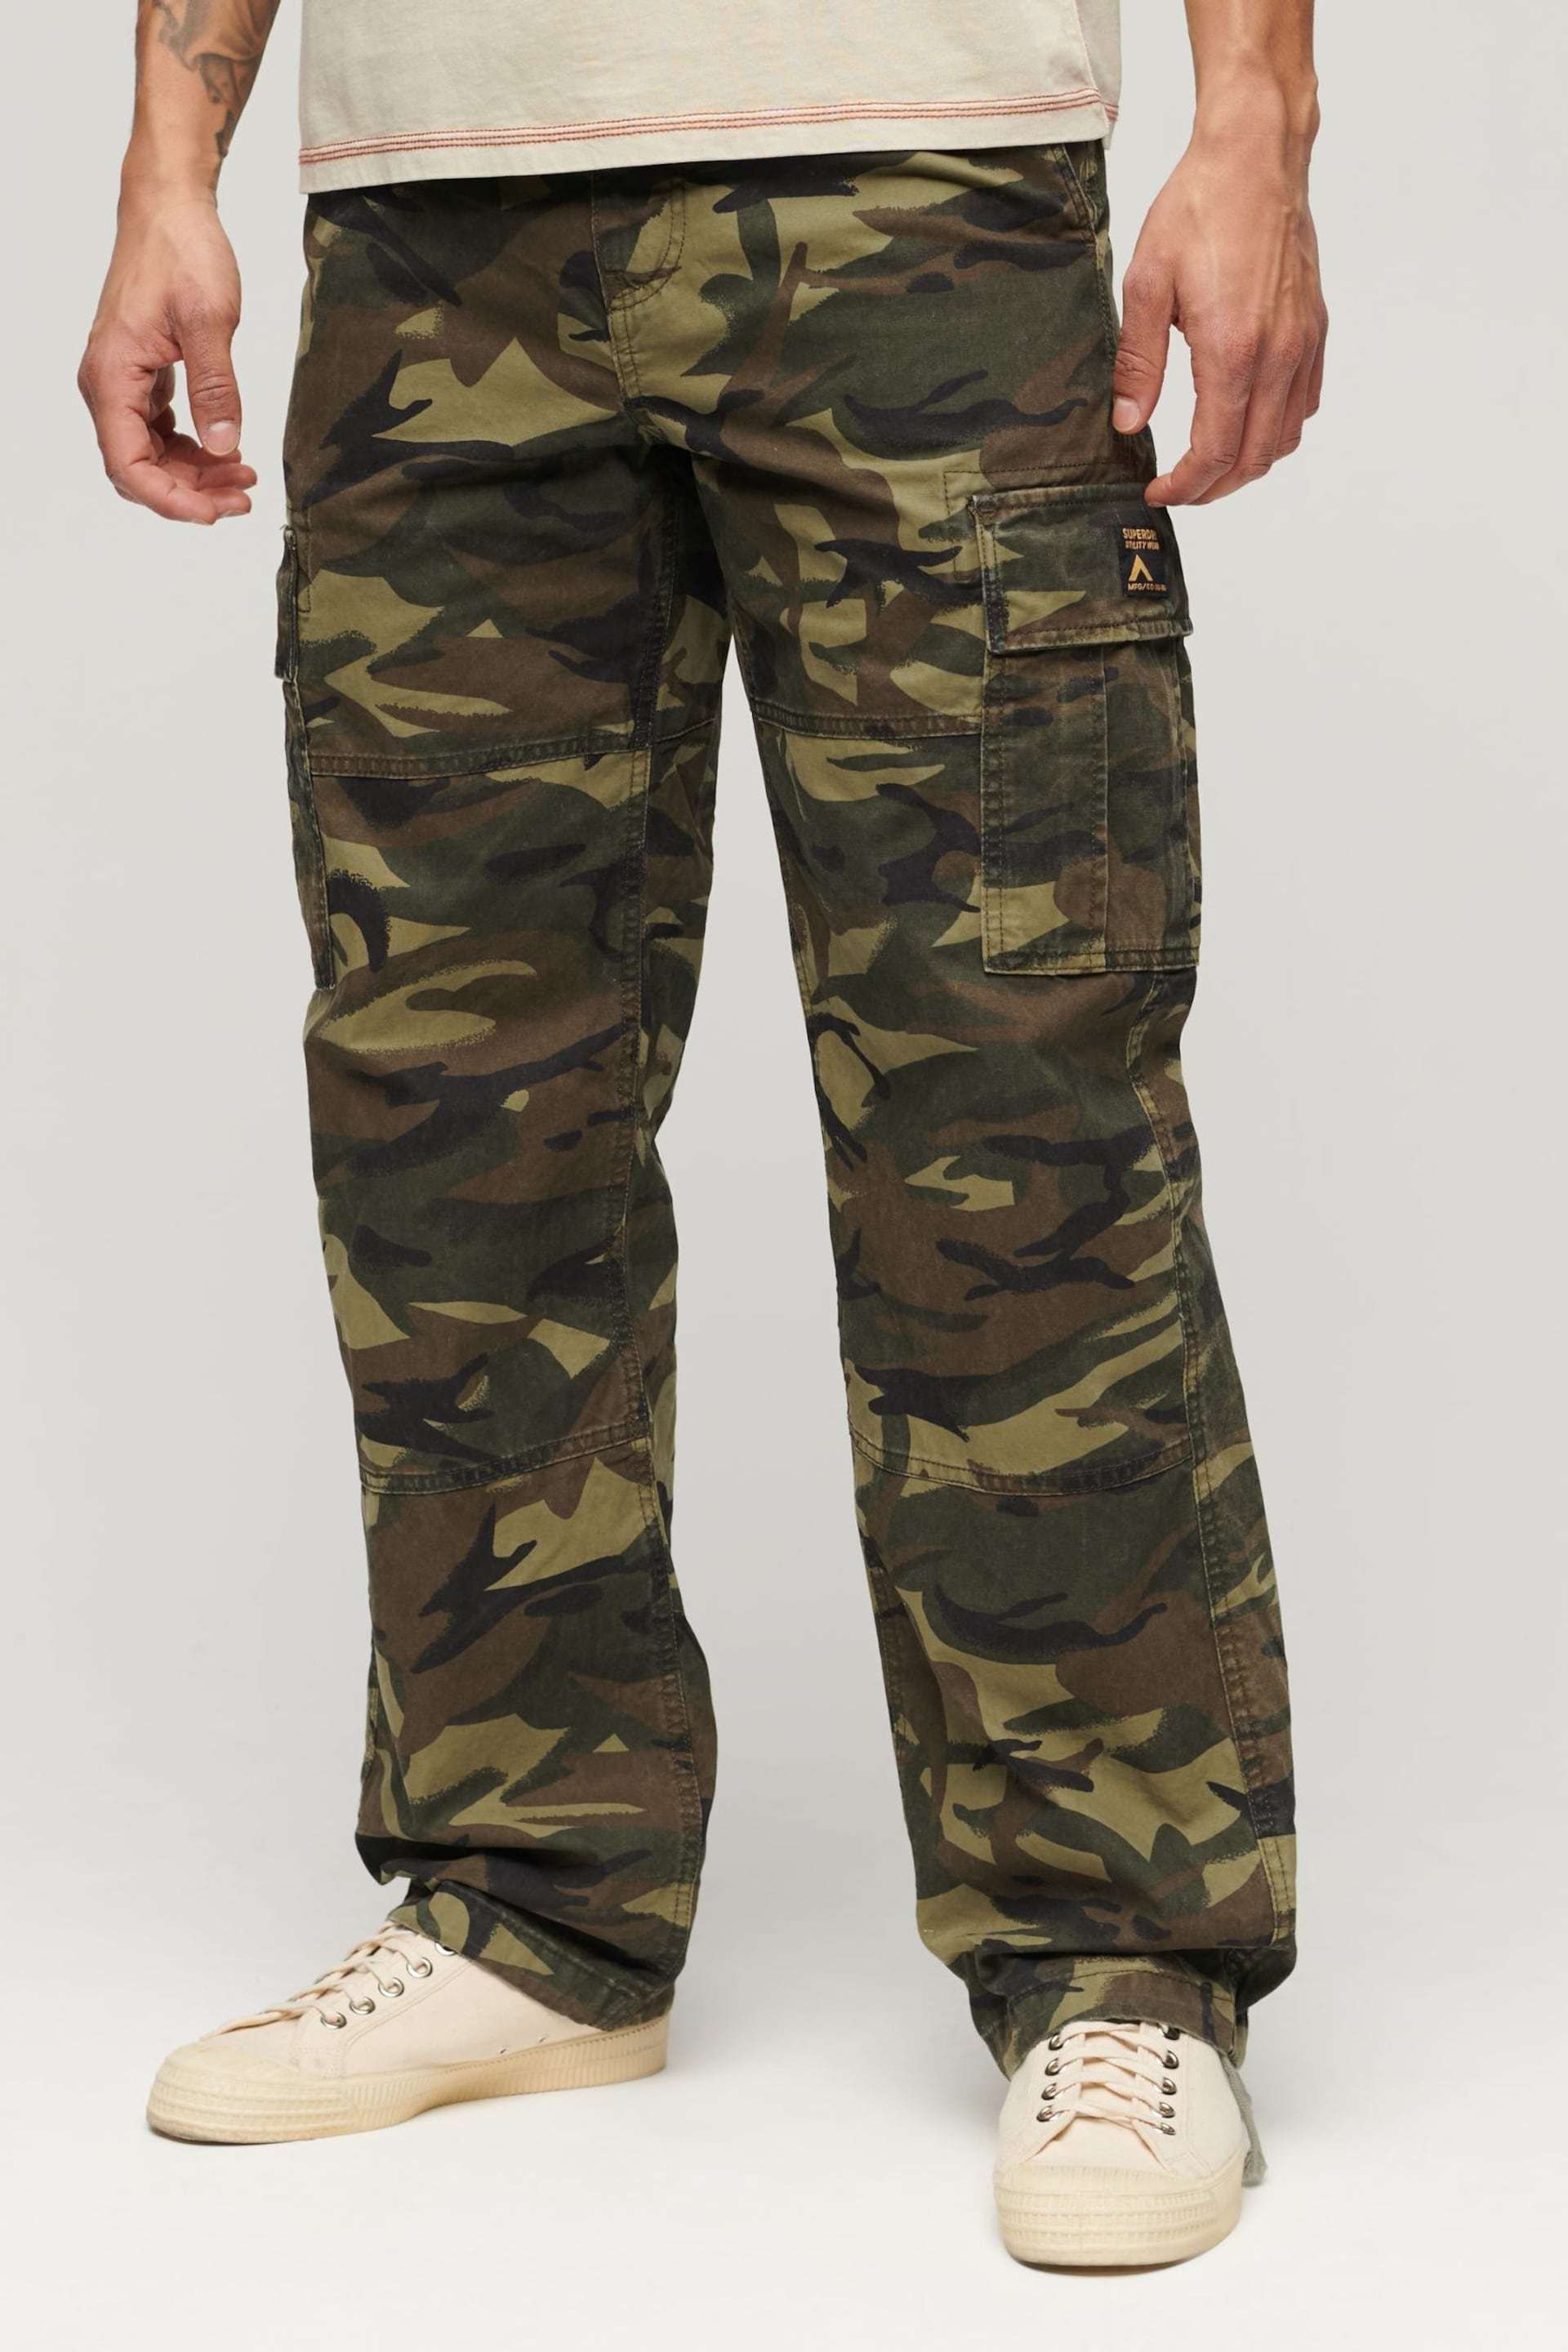 Superdry Green Baggy Cargo Trousers - Image 1 of 5